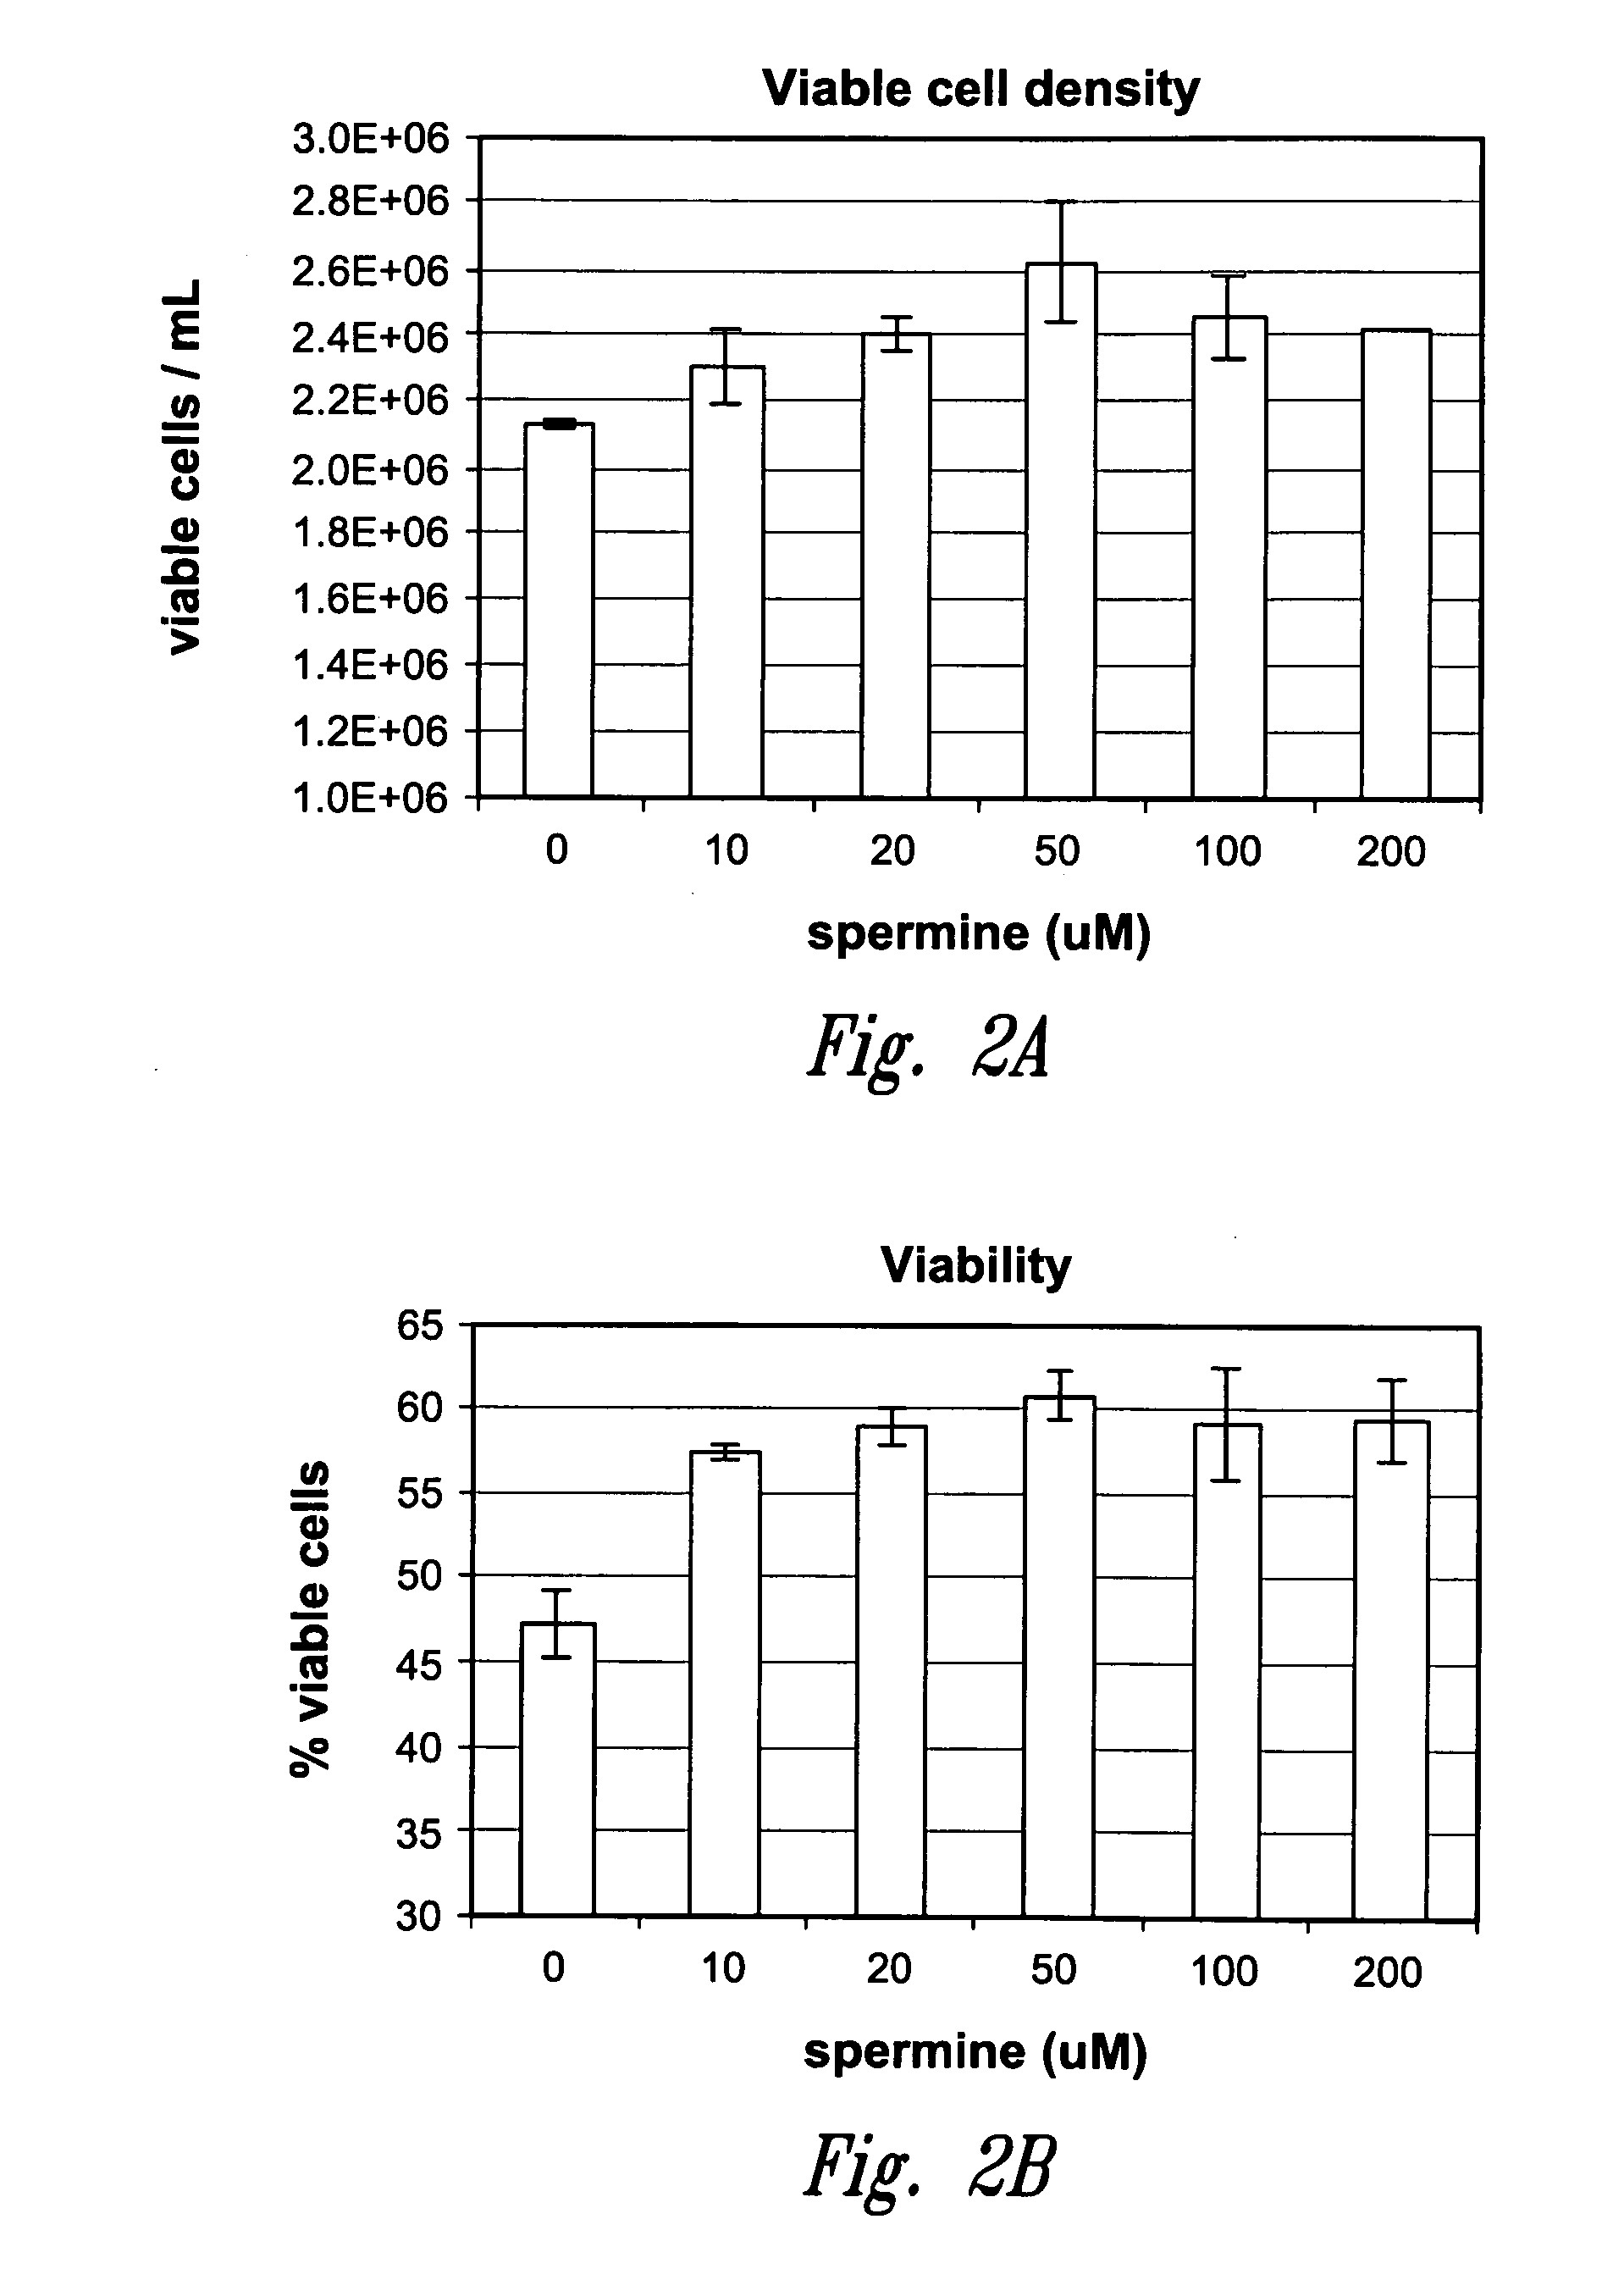 Method for culturing mammalian cells to improve recombinant protein production